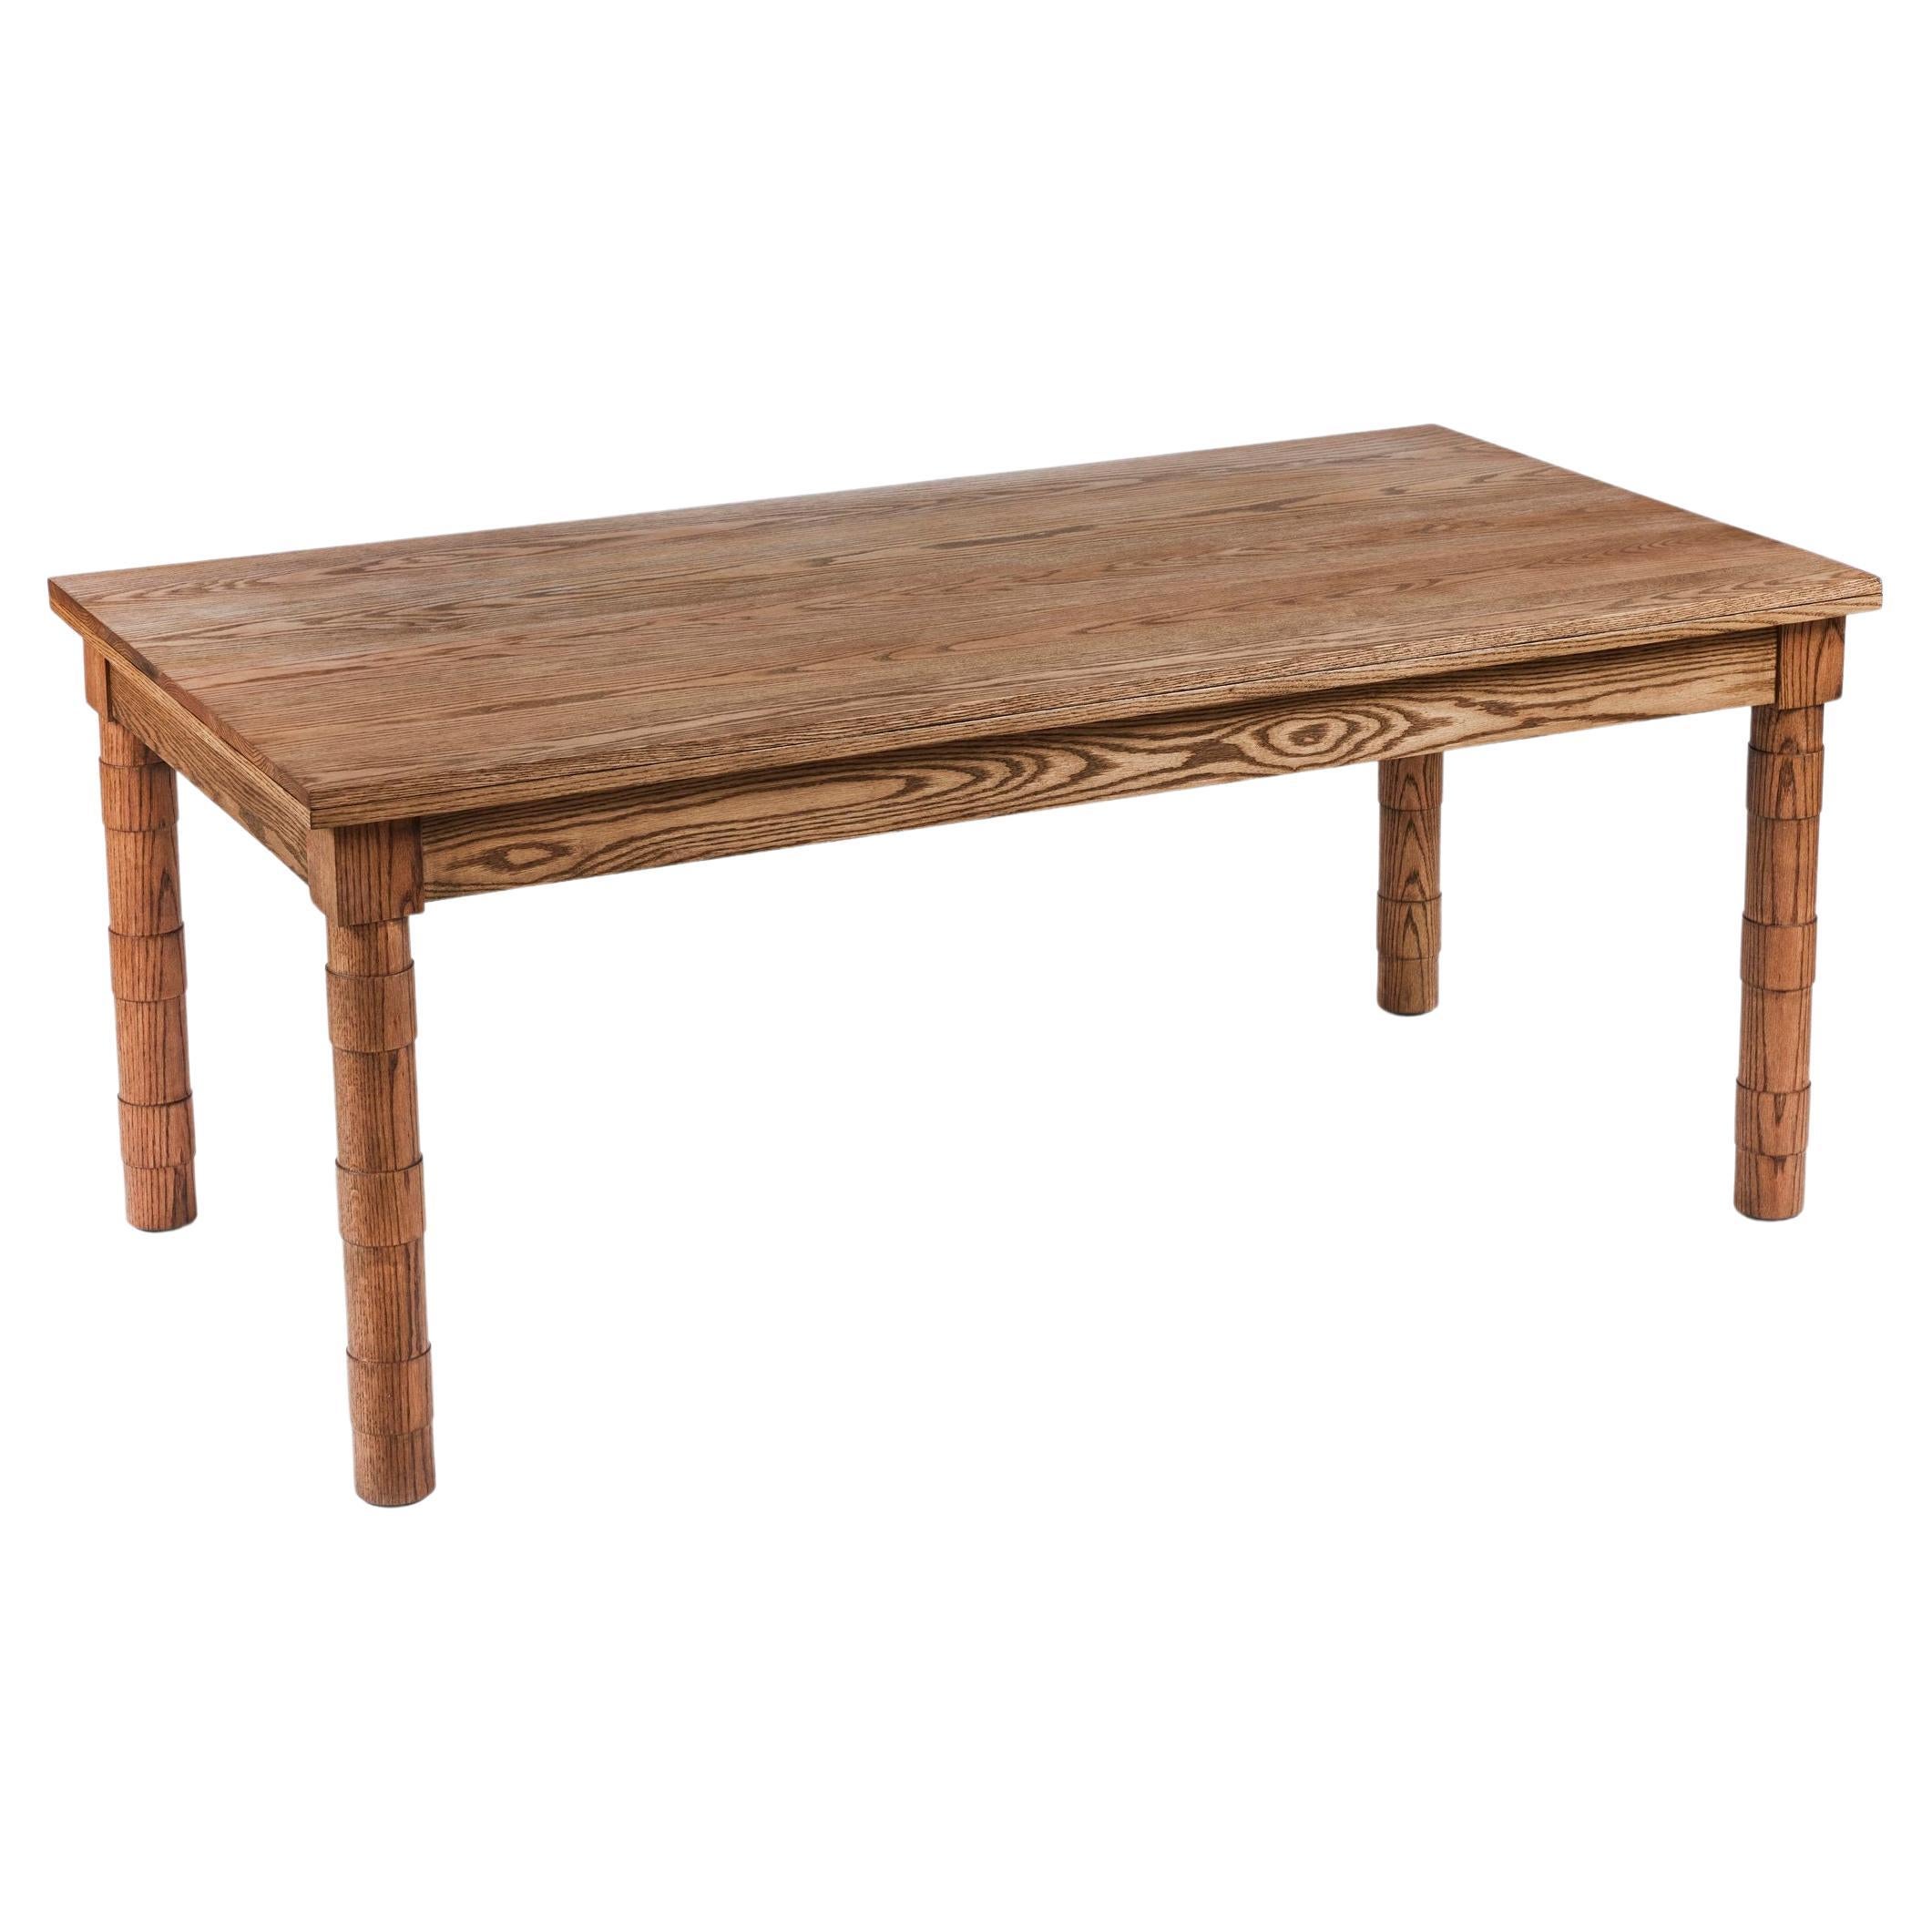 Transitional Turned Leg Jenks Dining Table in Tanned Oak by Martin and Brockett For Sale